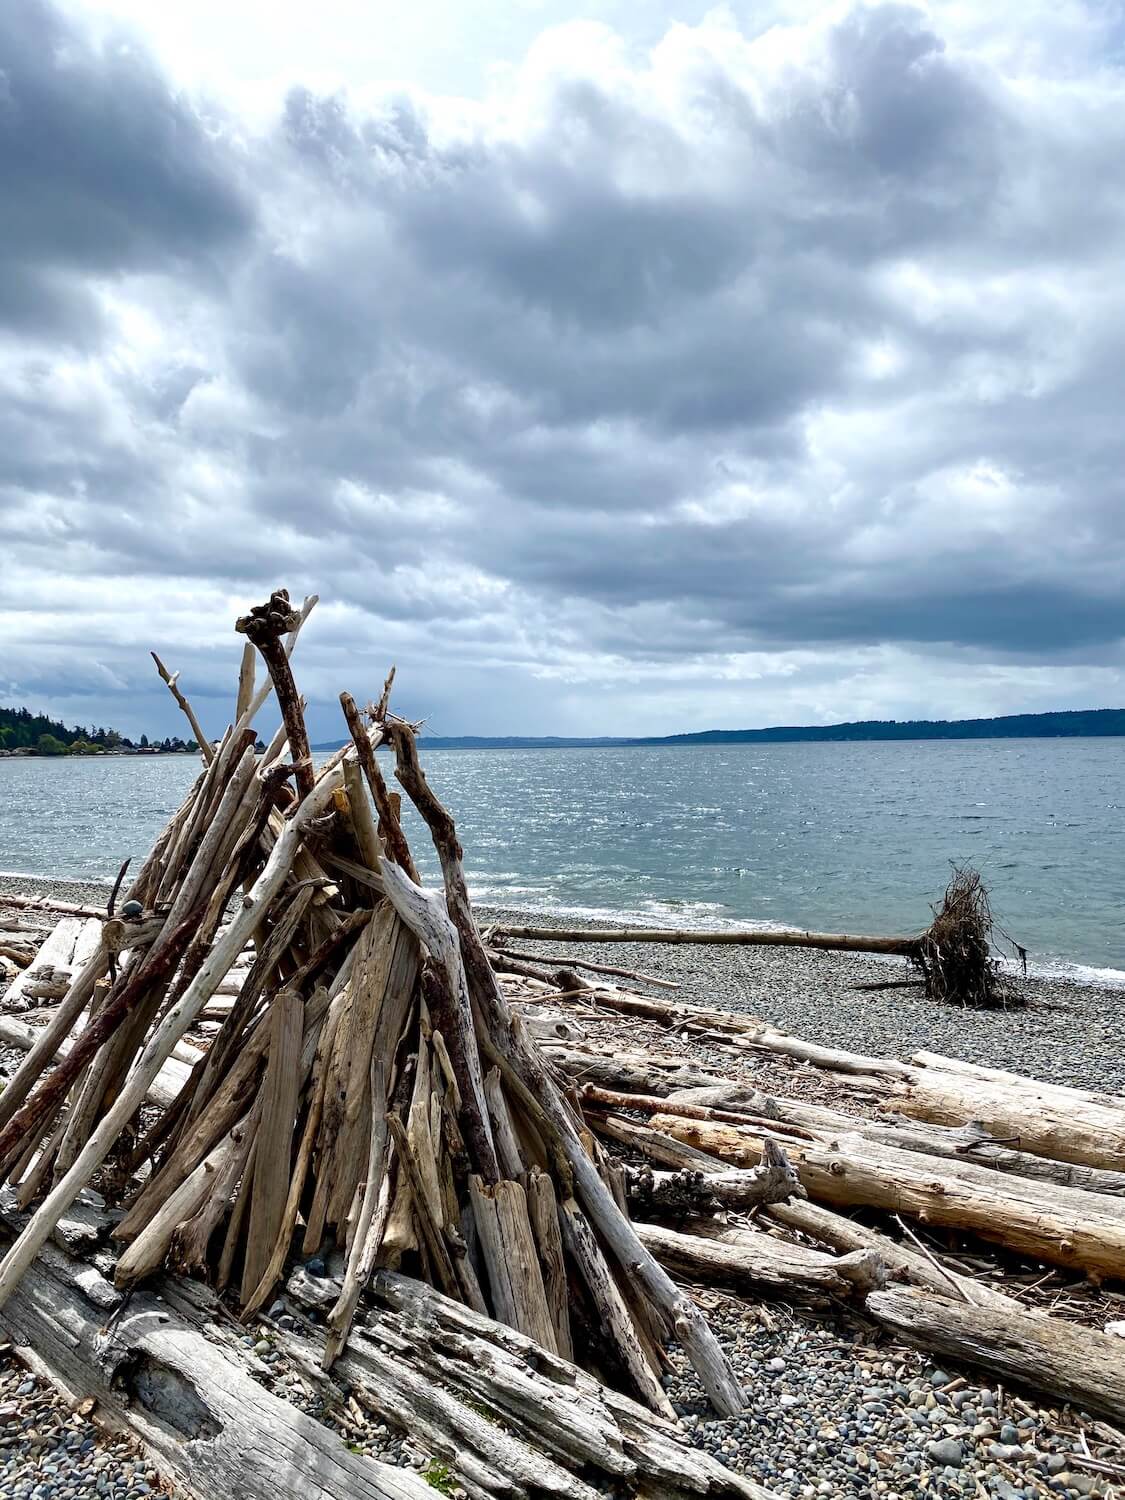 Driftwoord have been propped up to create a shelter from the elements at a Puget Sound shoreline.  The beach is made up a medium sized pebbles that lead down to minor waves of seawater splashing.  In the distant background are islands under gray clouds. 